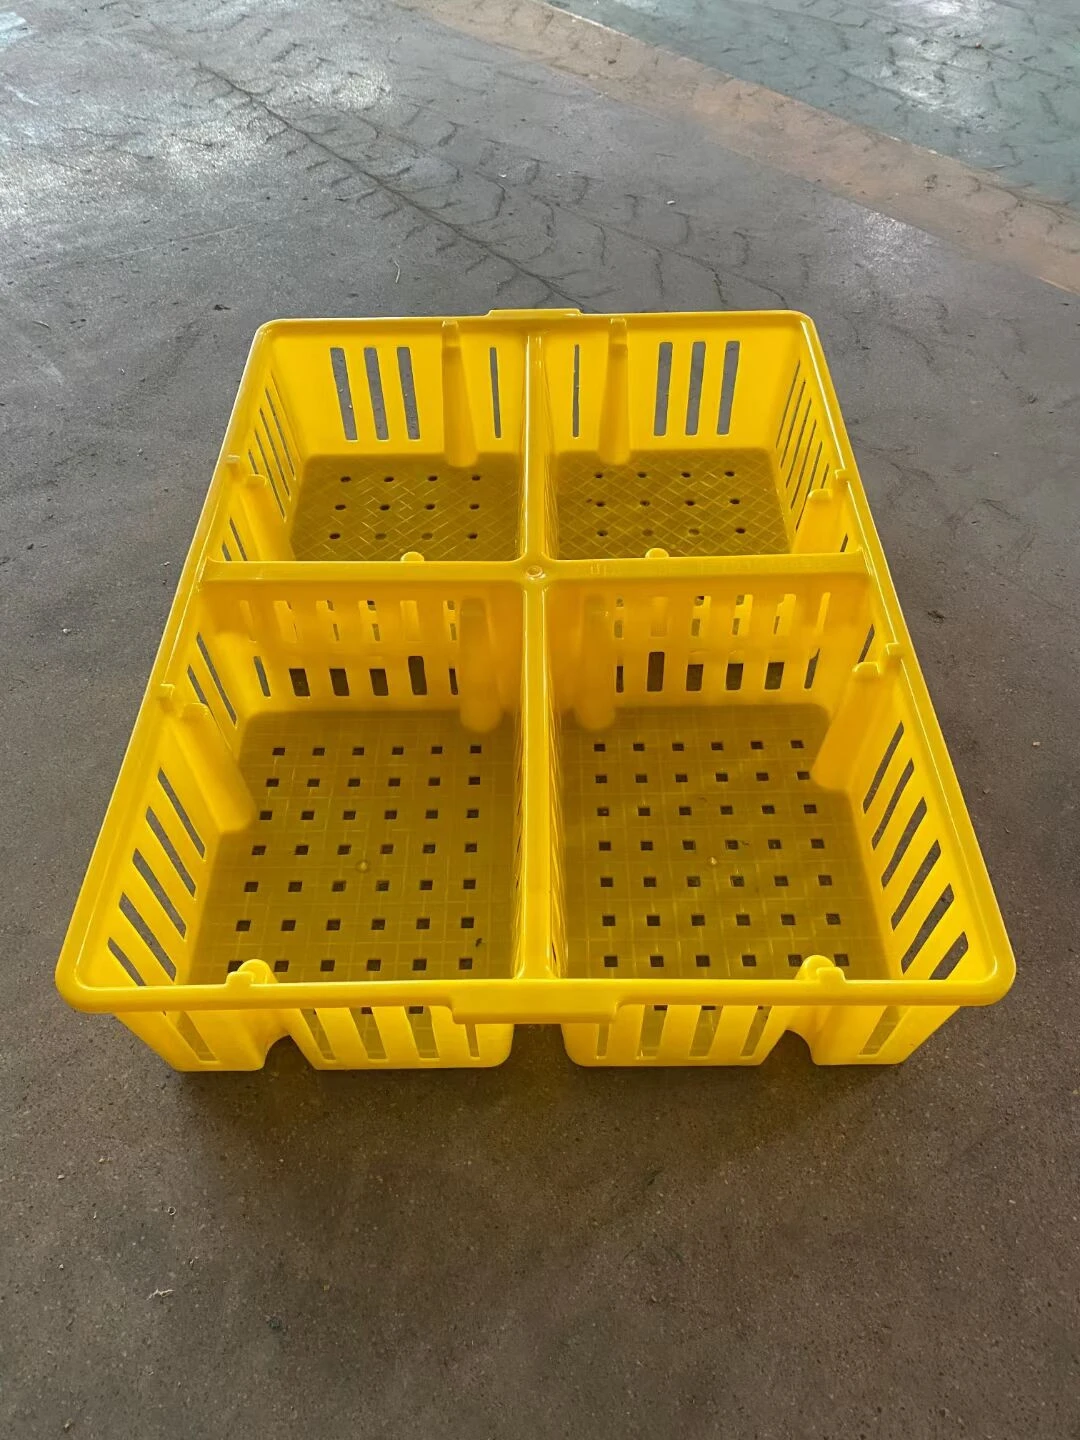 good quality 690 x 490 x 140 mm  plastic transport cage basket crate for chicks